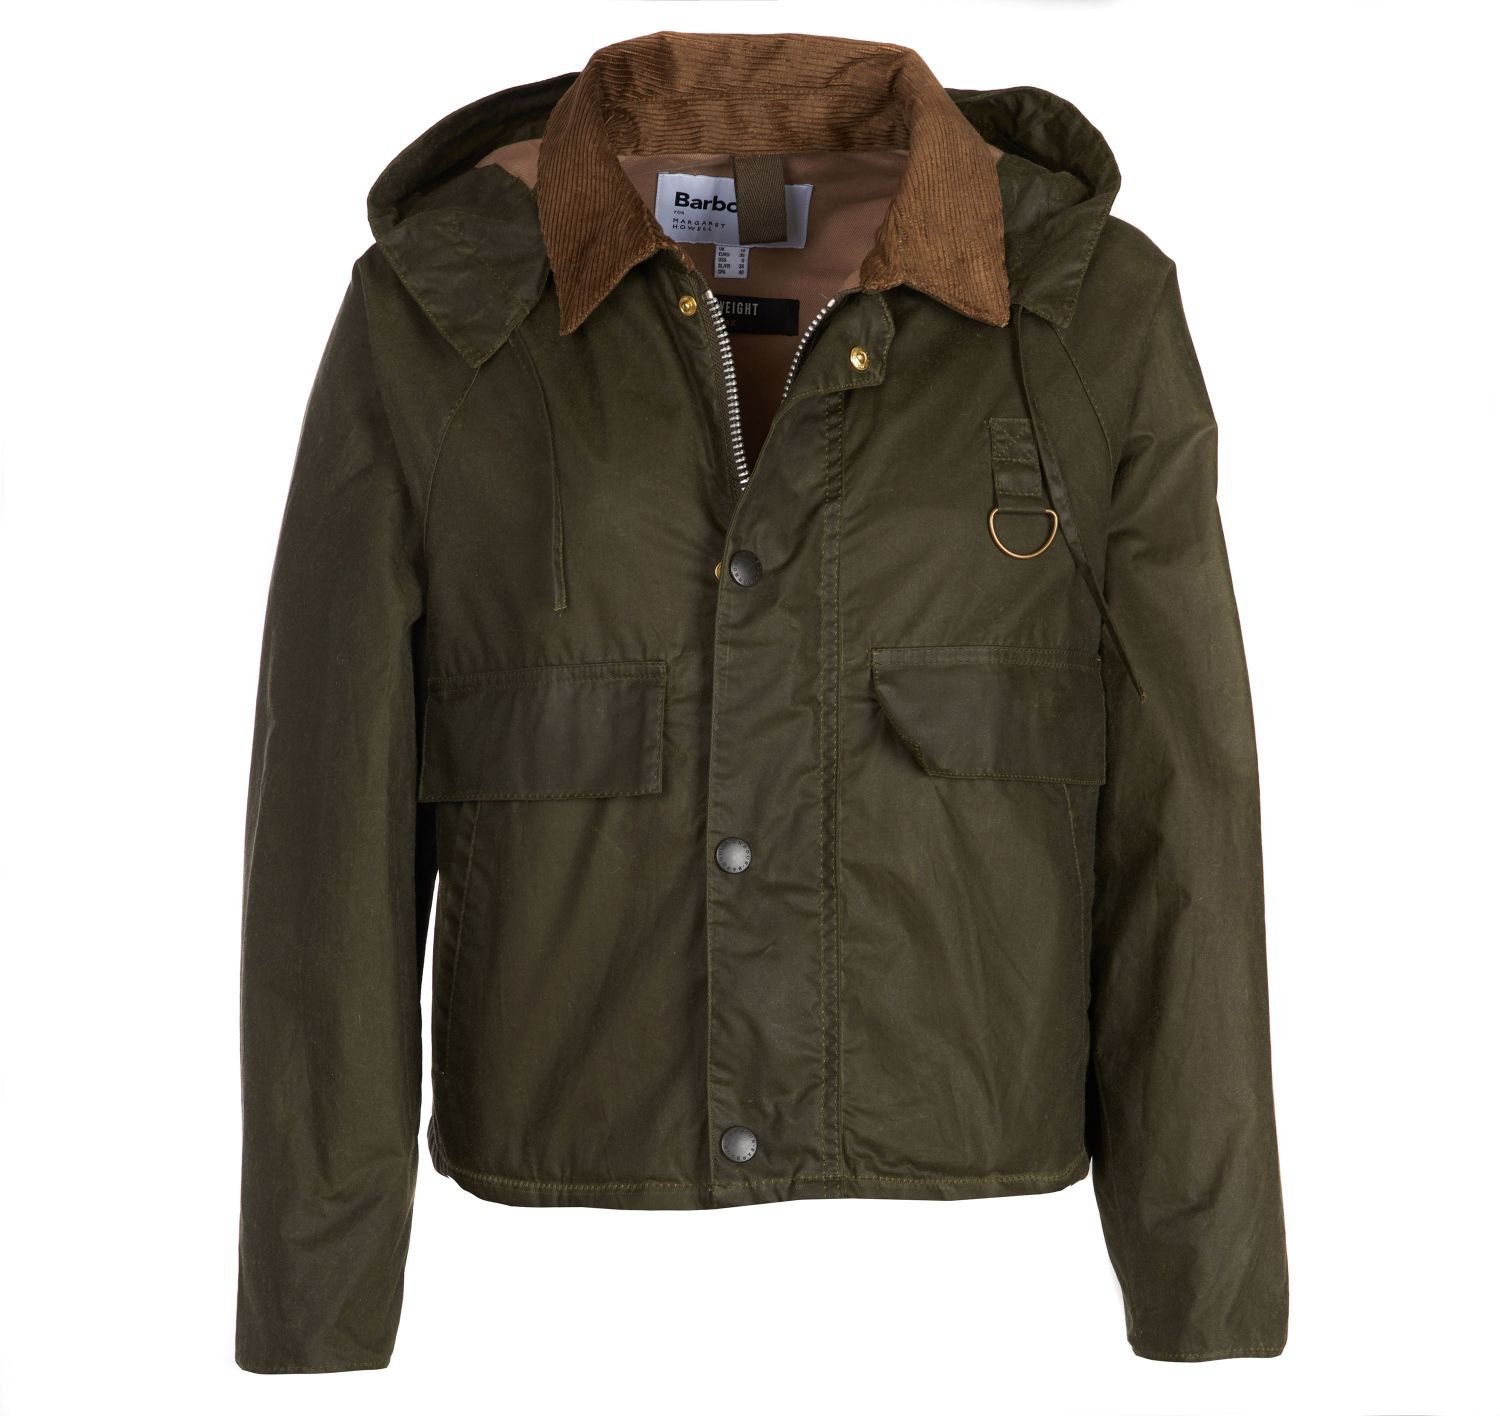 BARBOUR Margaret Howell Spey Waxed Cotton Jacket in Archive Olive ...